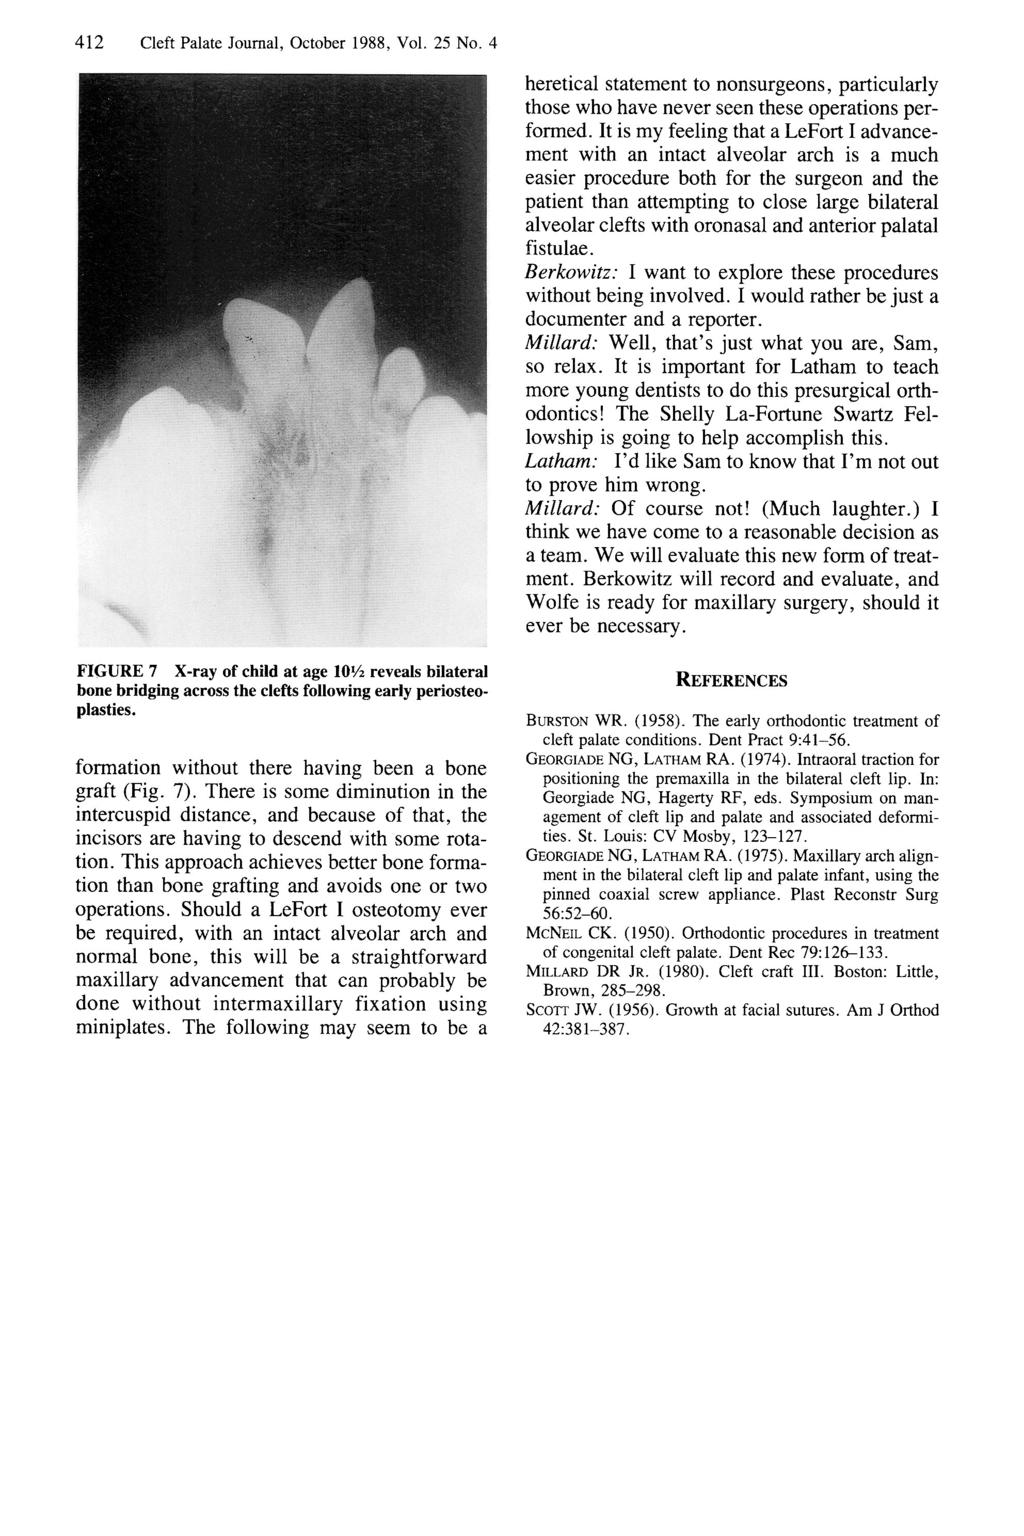 412 Cleft Palate Journal, October 1988, Vol. 25 No. 4 heretical statement to nonsurgeons, particularly those who have never seen these operations performed.